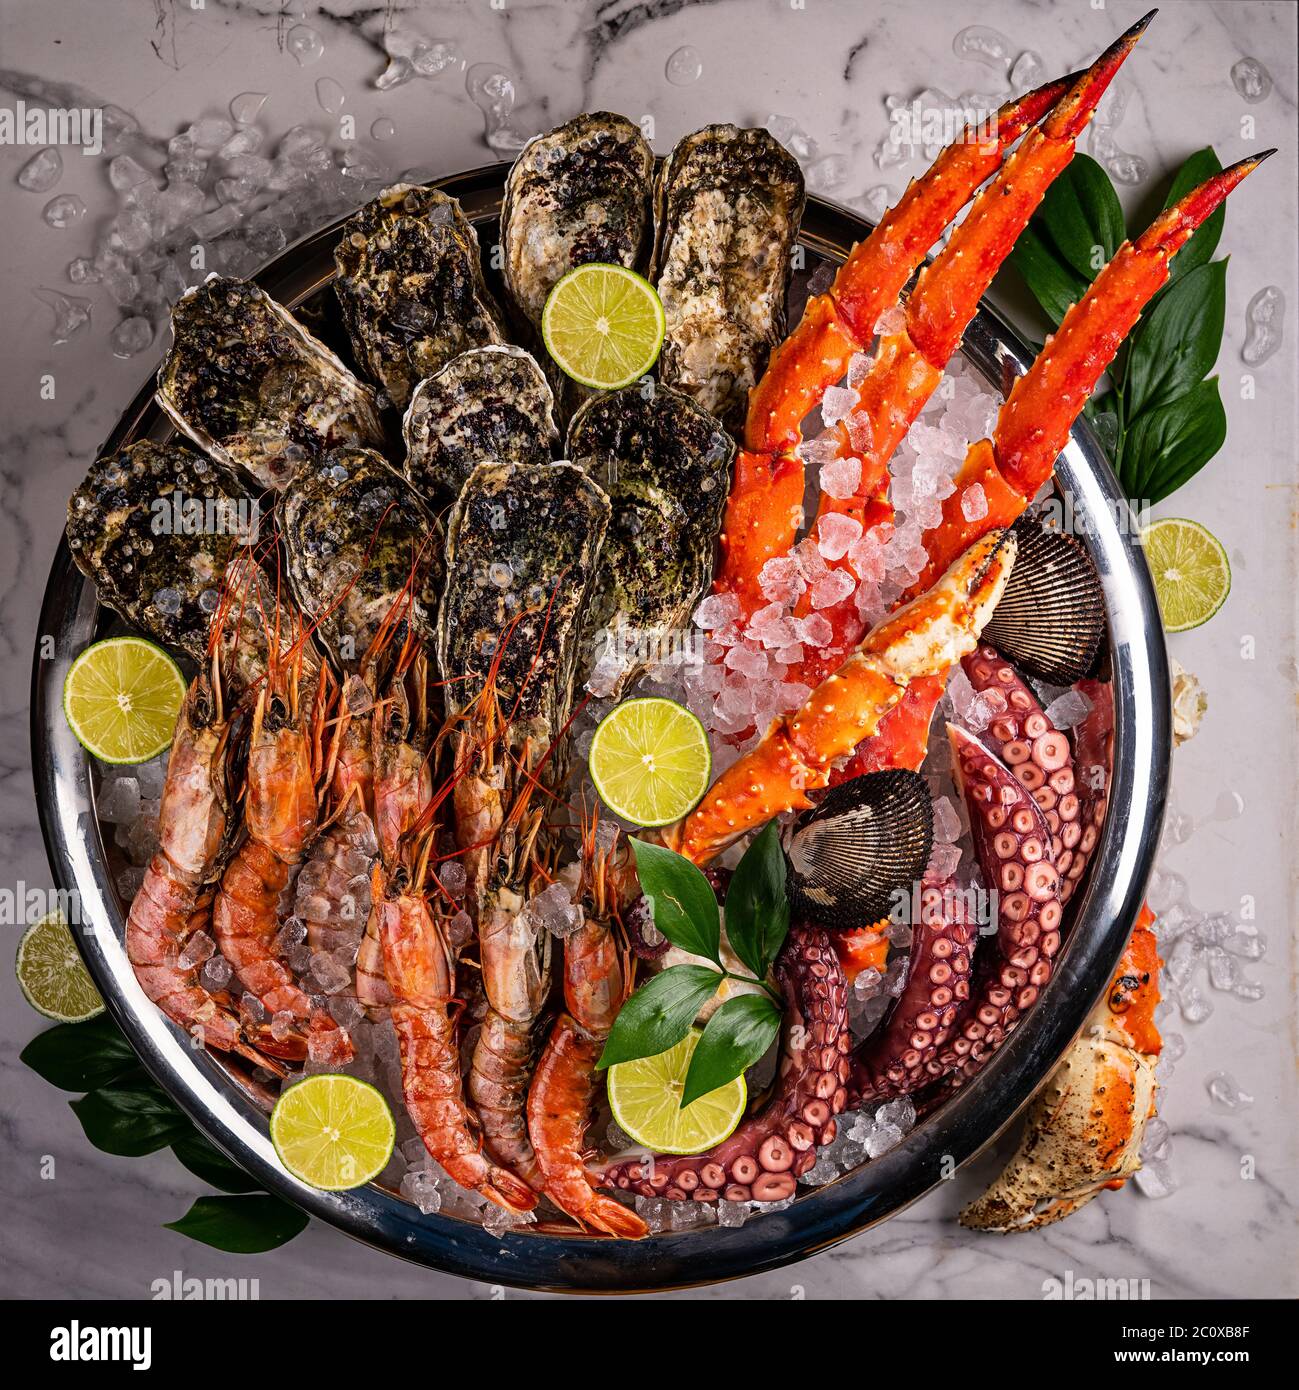 Fresh seafood plate with lobster, mussels and oysters Stock Photo